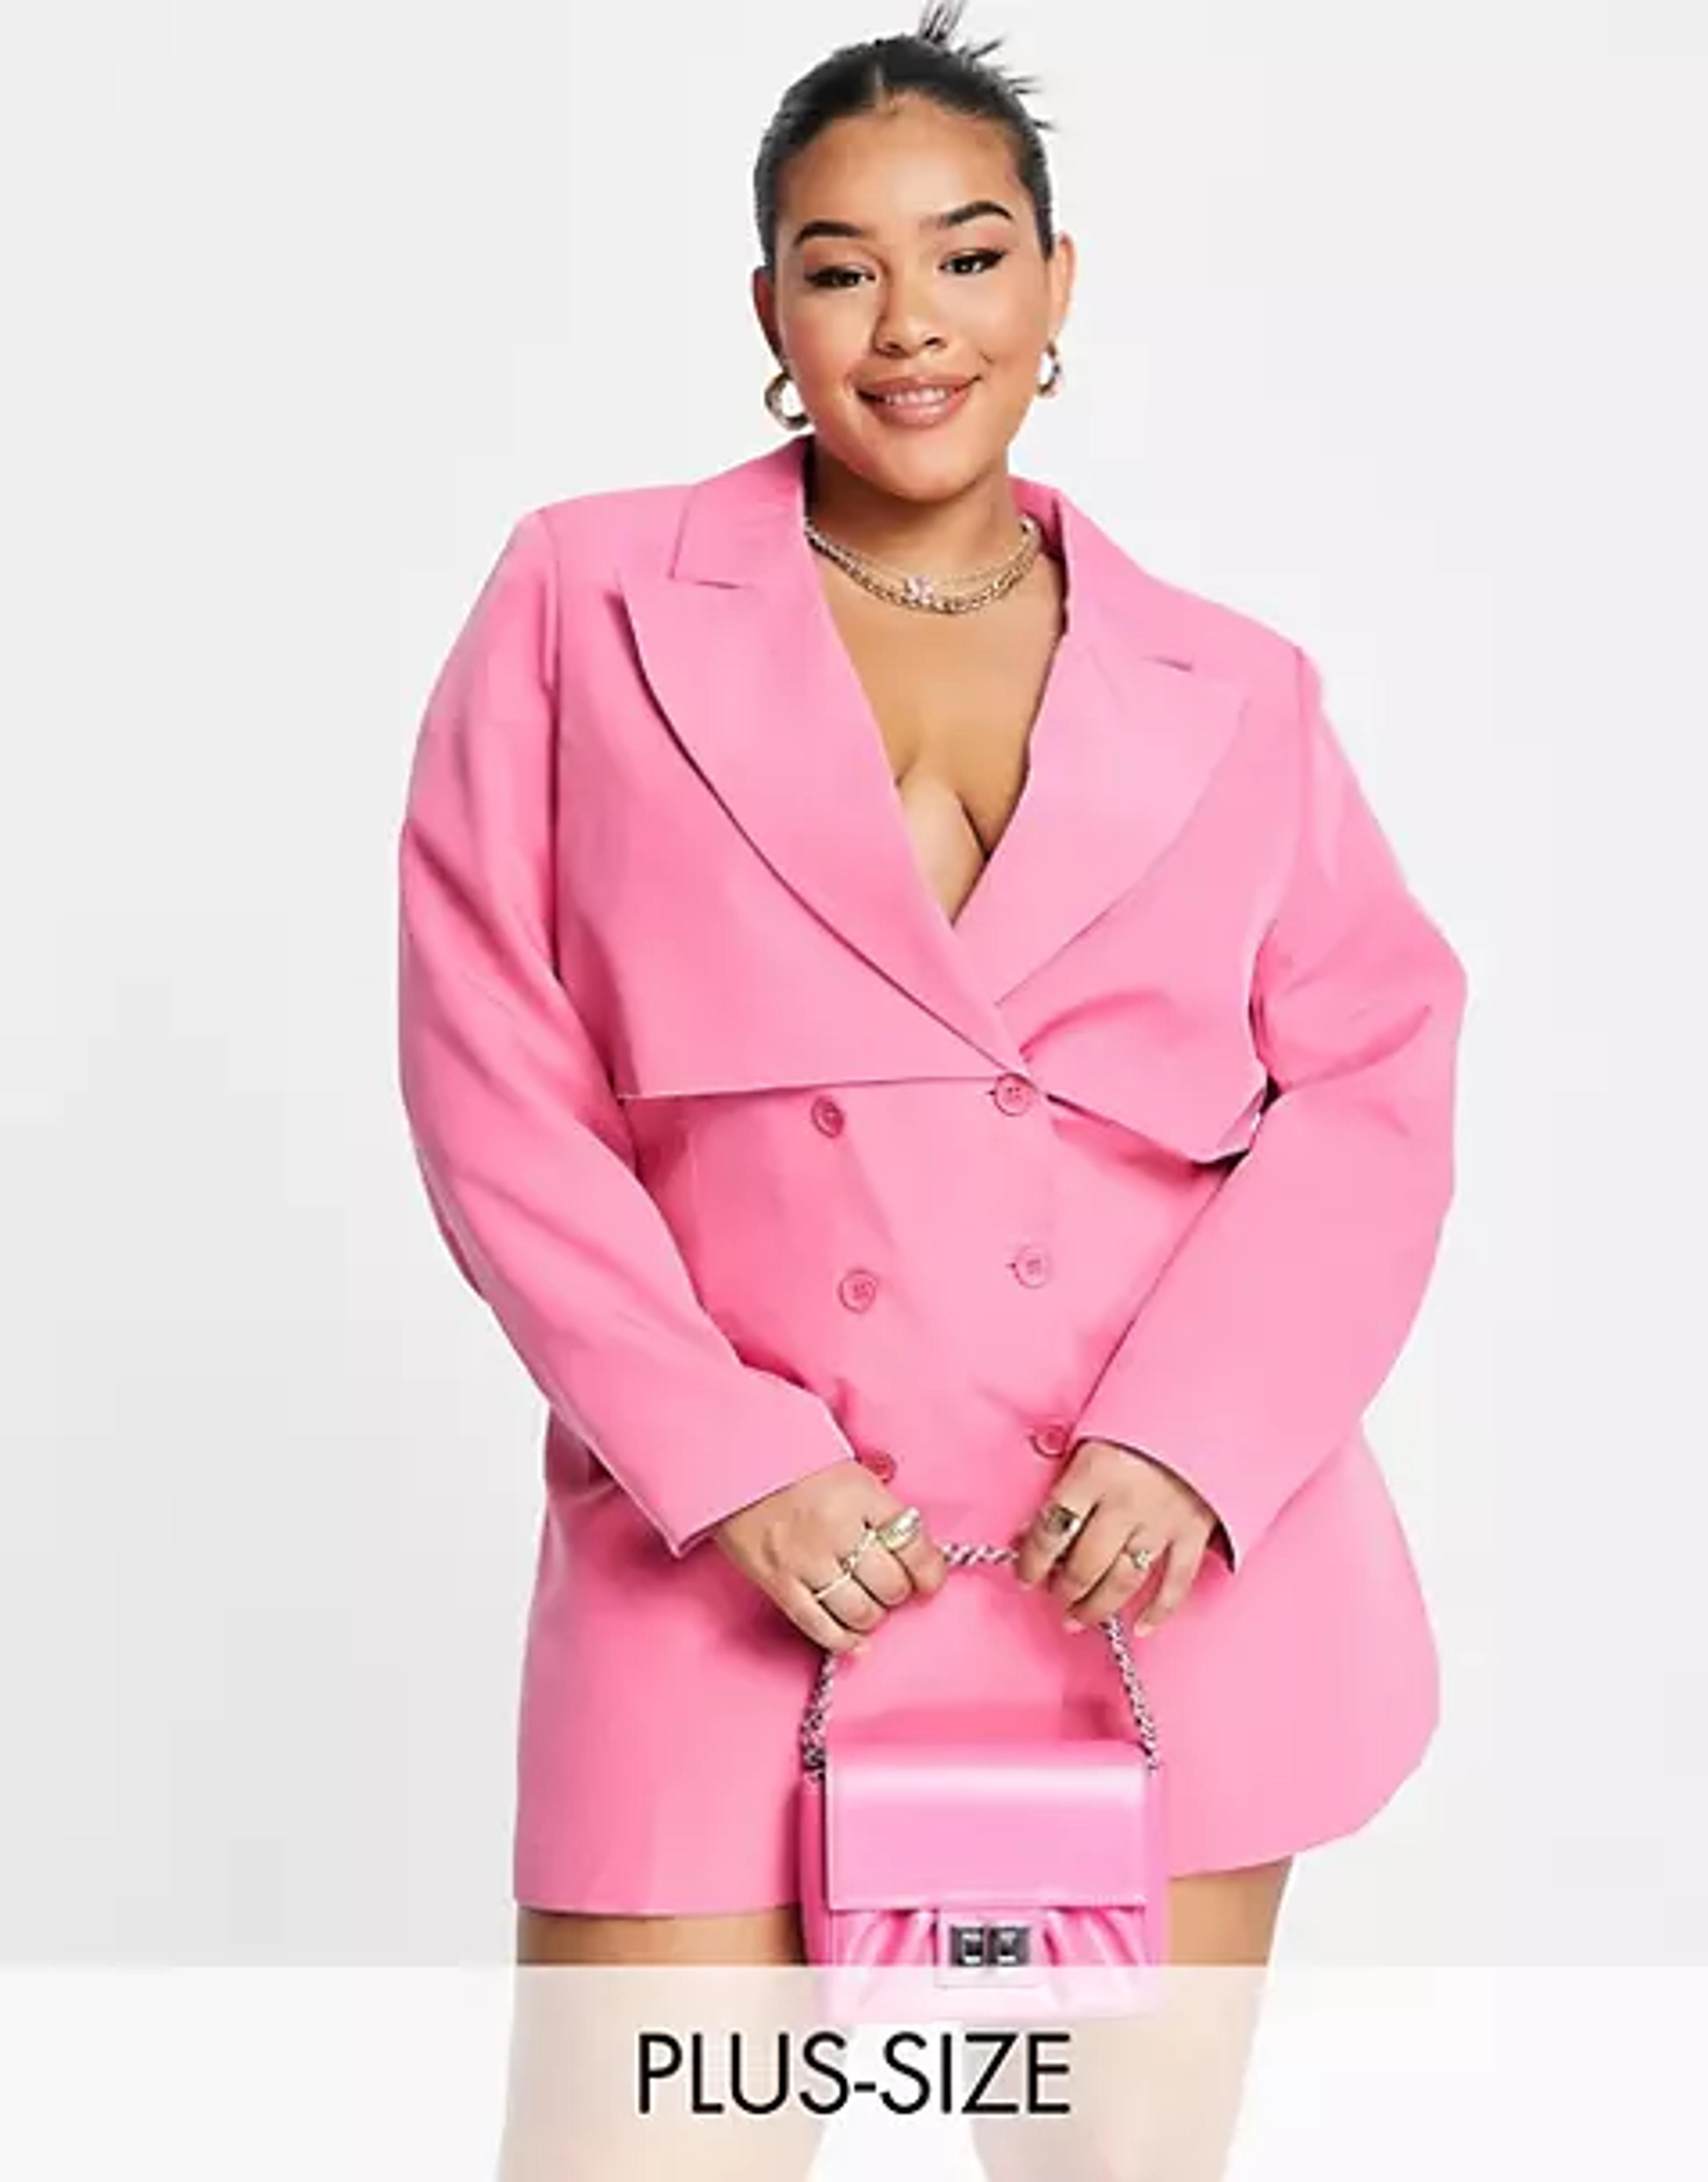 Extro & Vert double breasted mini blazer dress with overlay in hot pink | ASOS